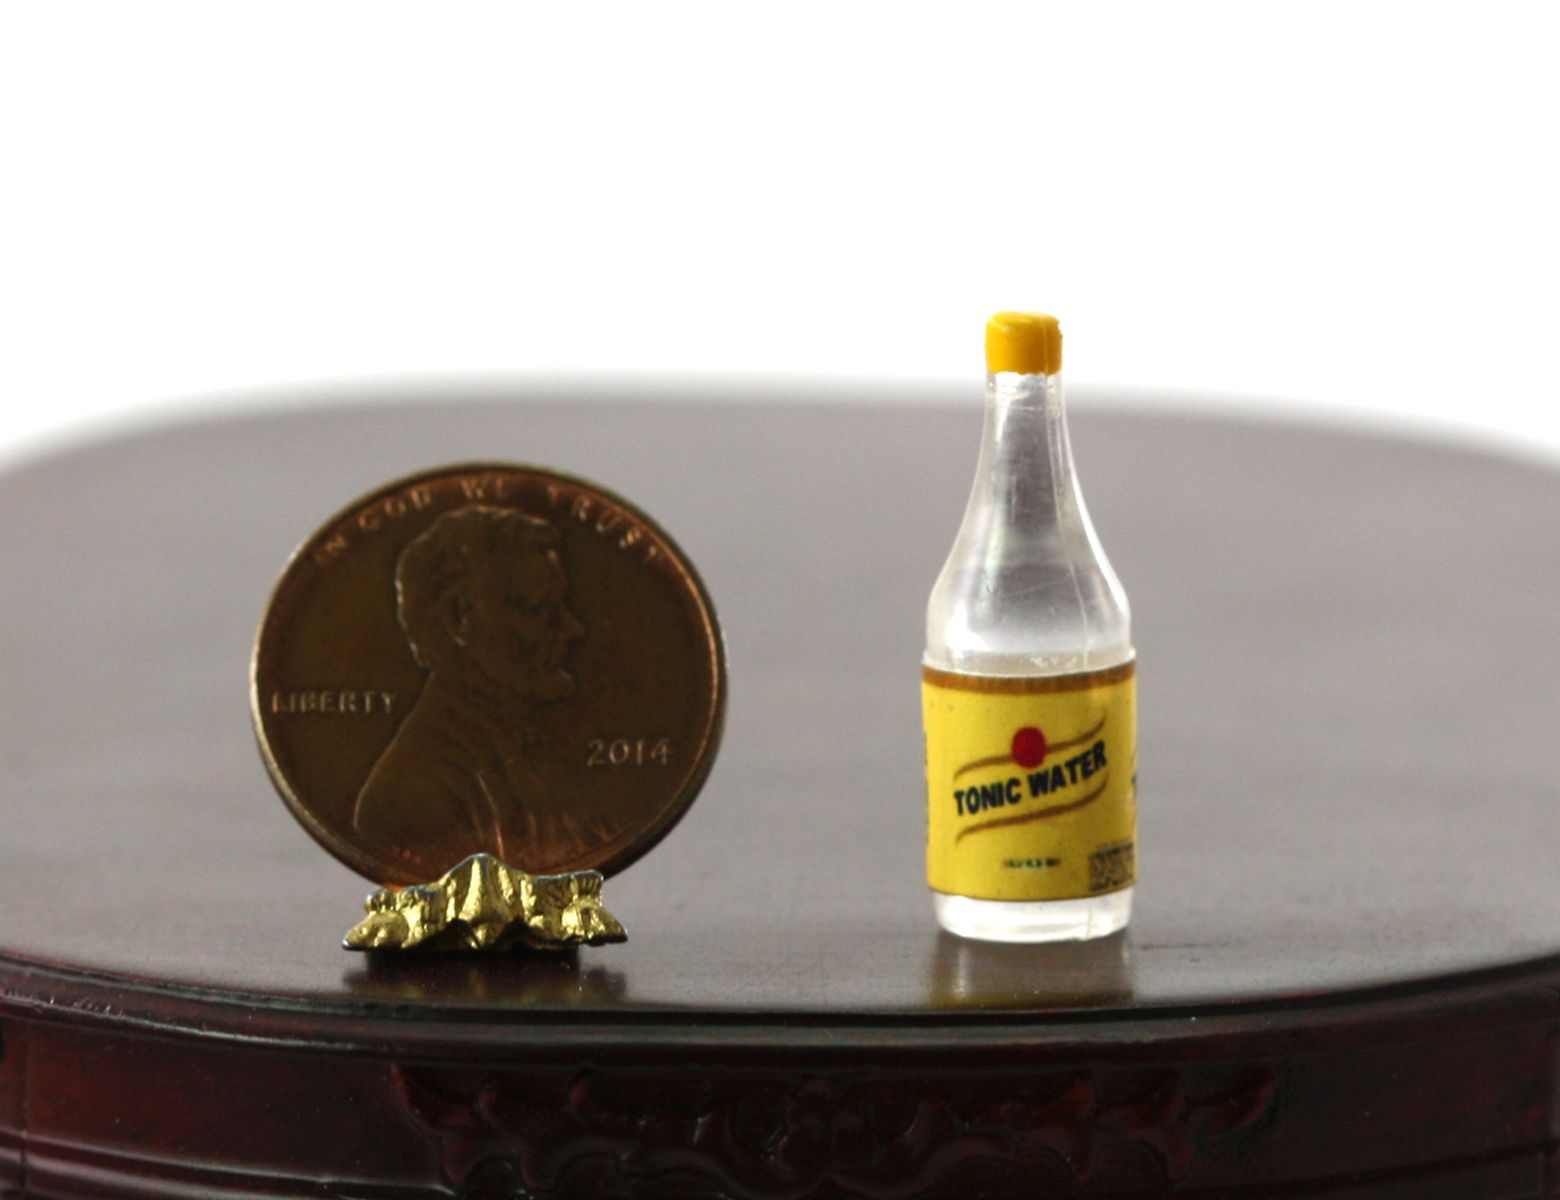 Dolls House Miniature 1/12th Scale Tonic Water 